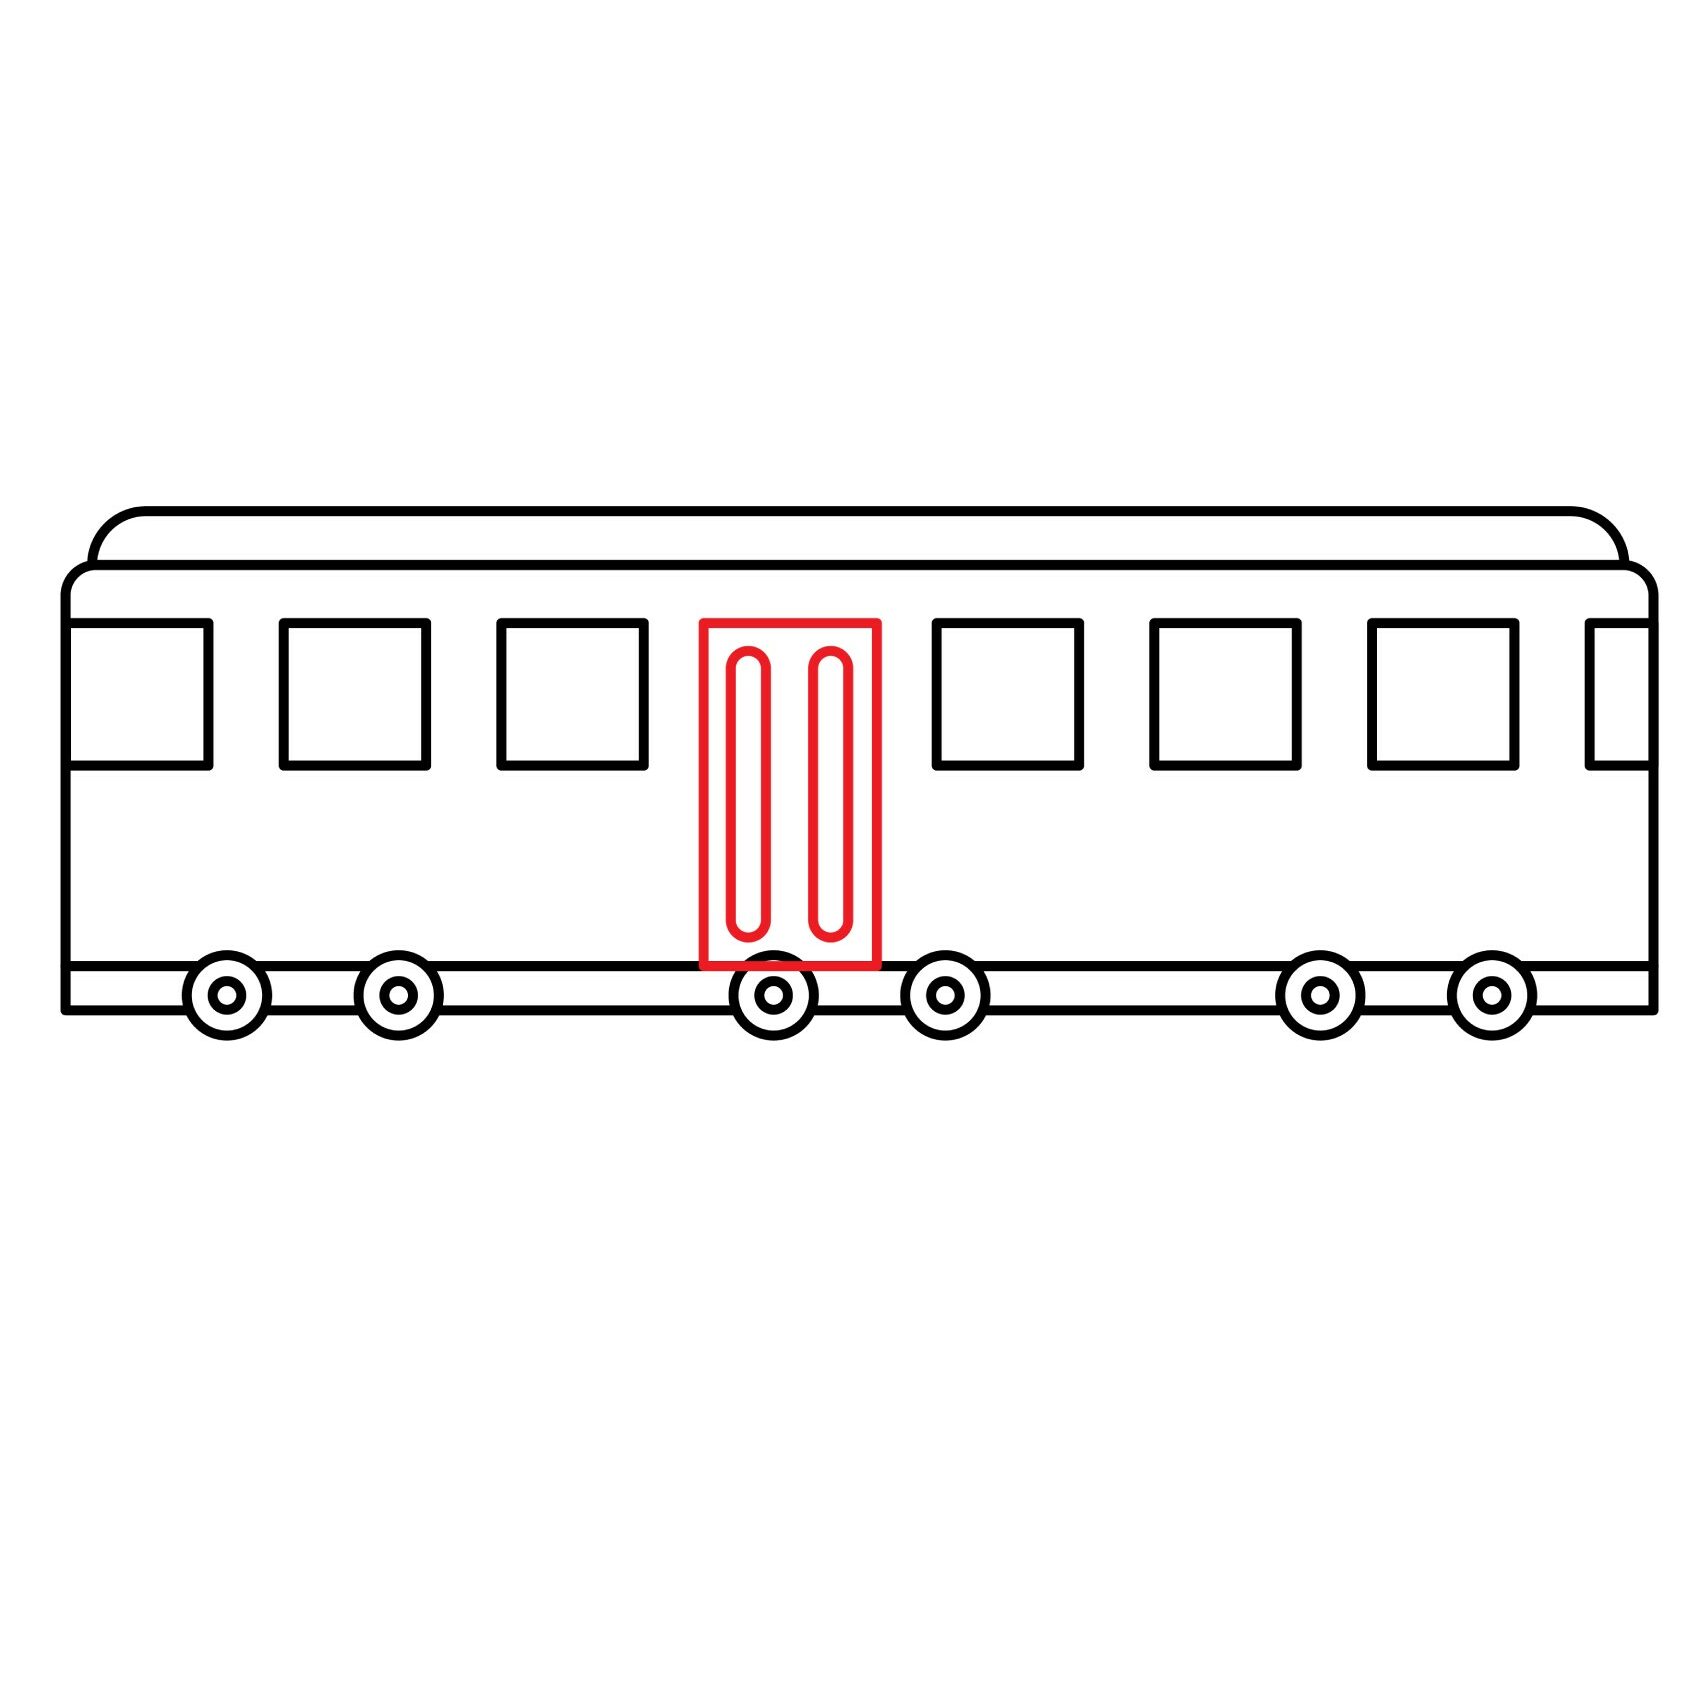 How to Draw a Tram